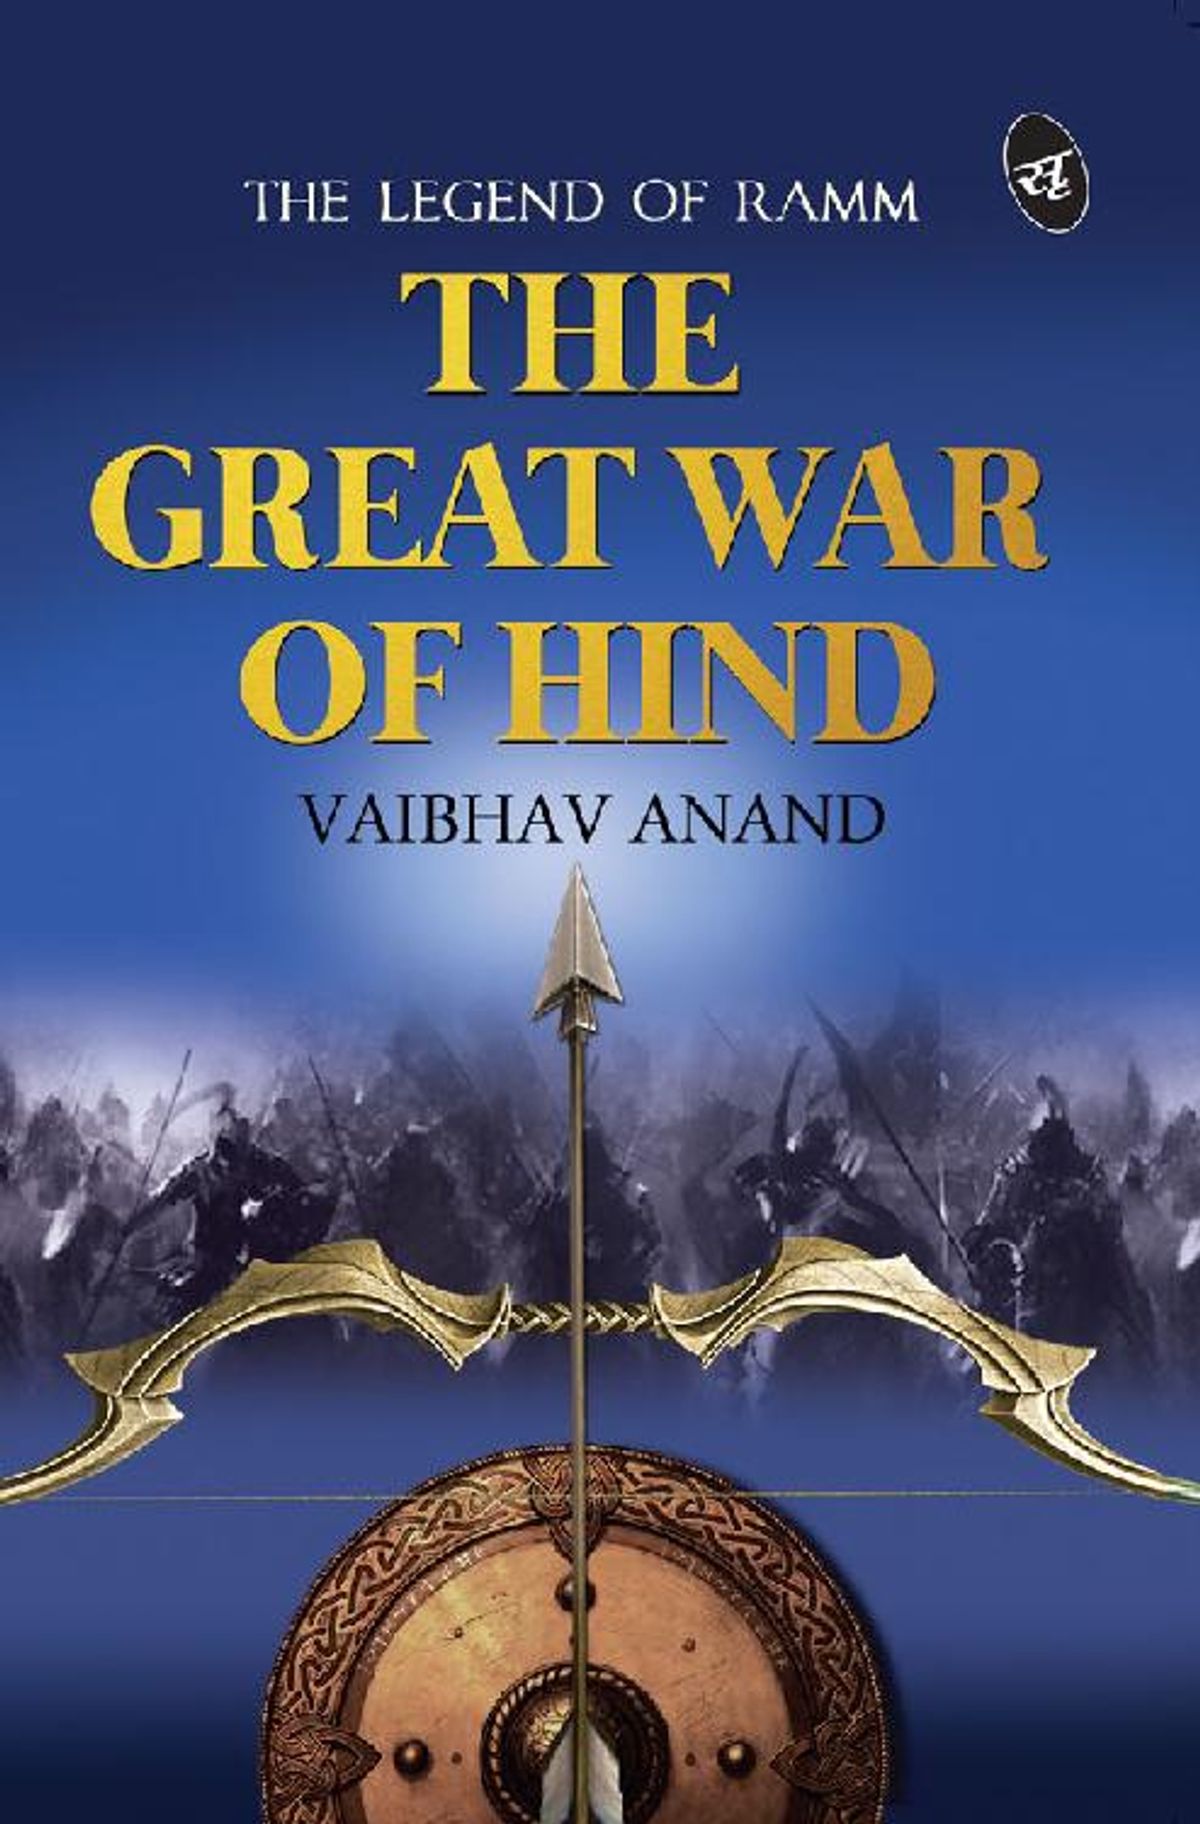 The Great War of Hind